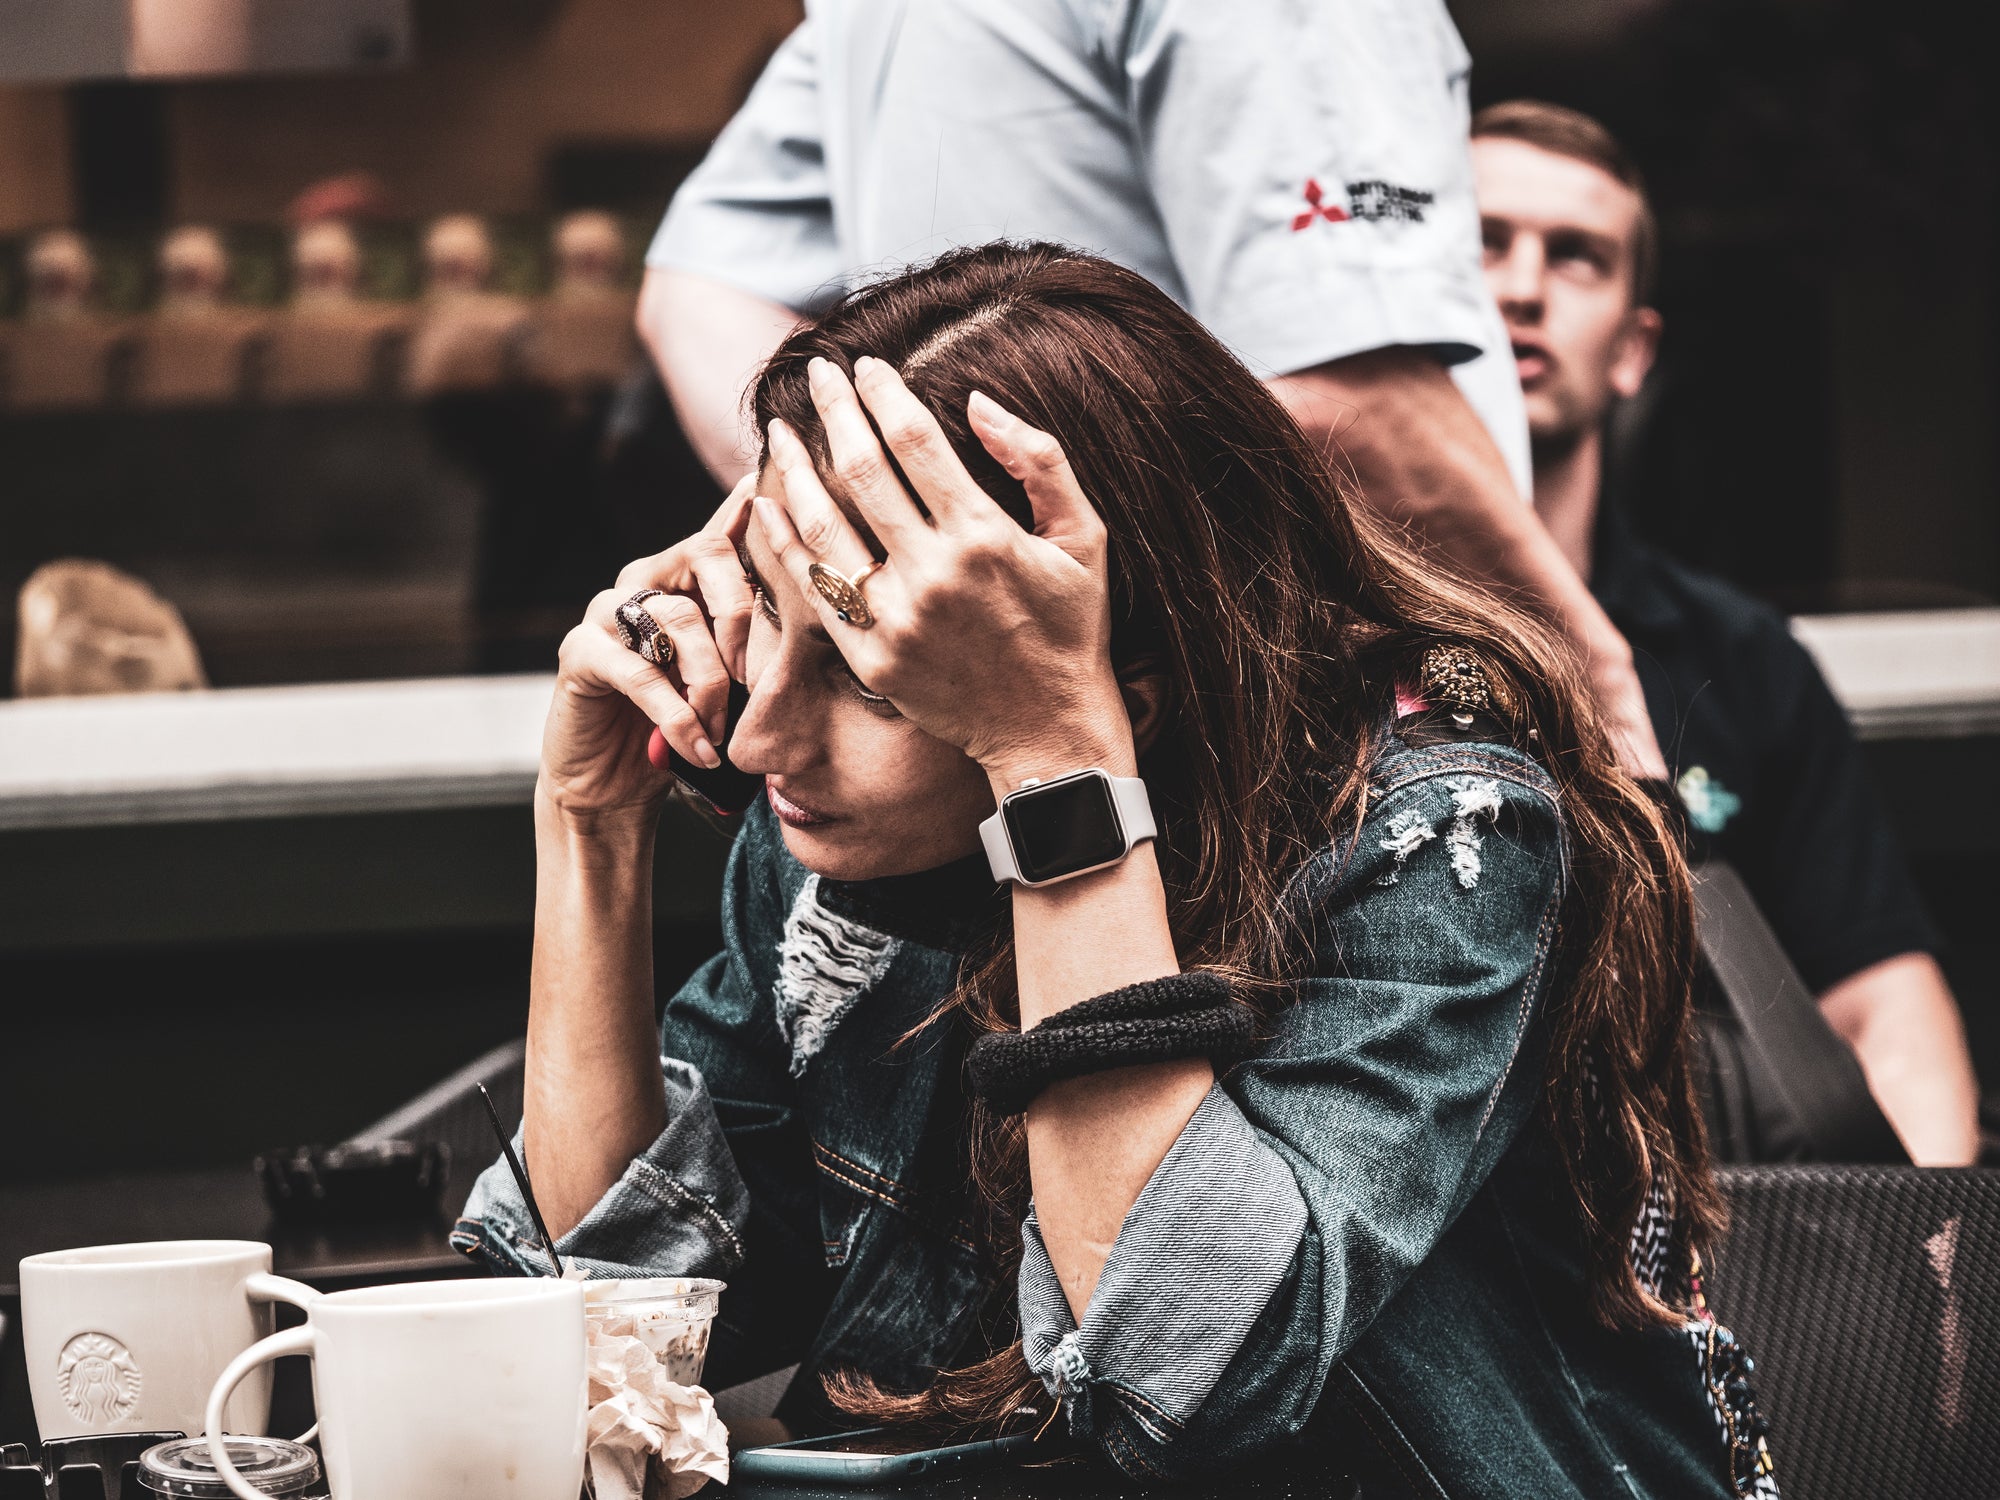 10 signs you may be going through a lot of stress